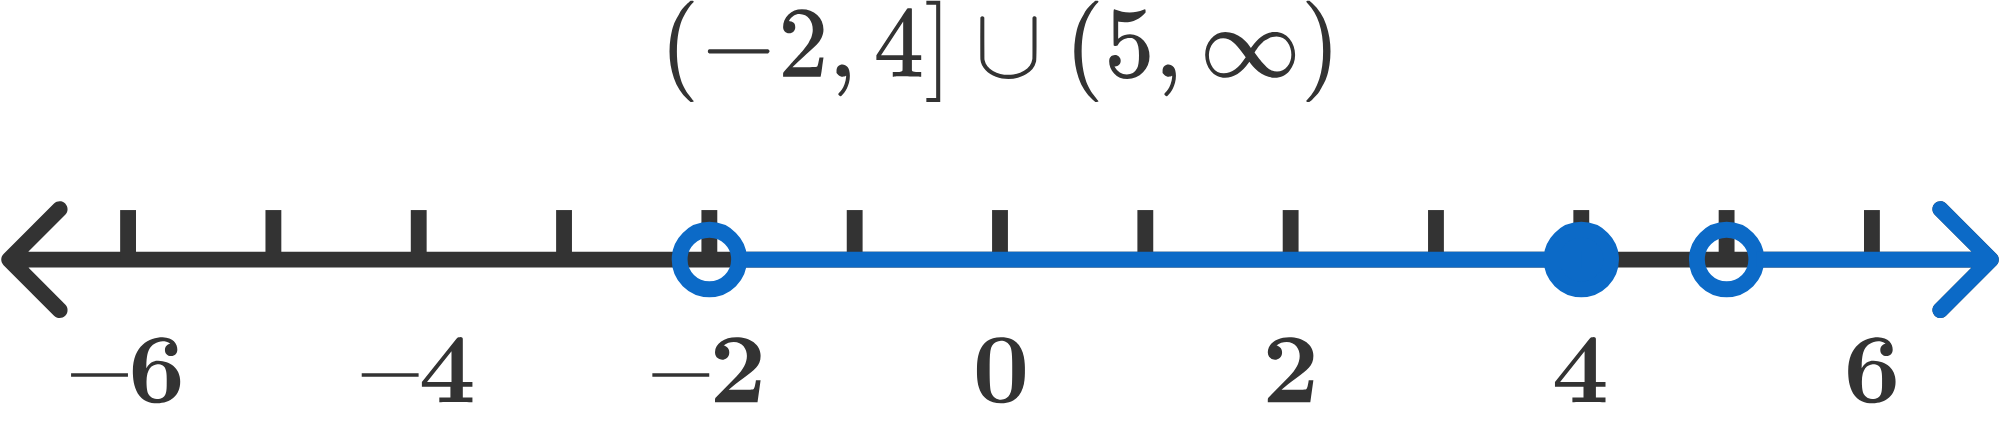 Example of an interval Notation